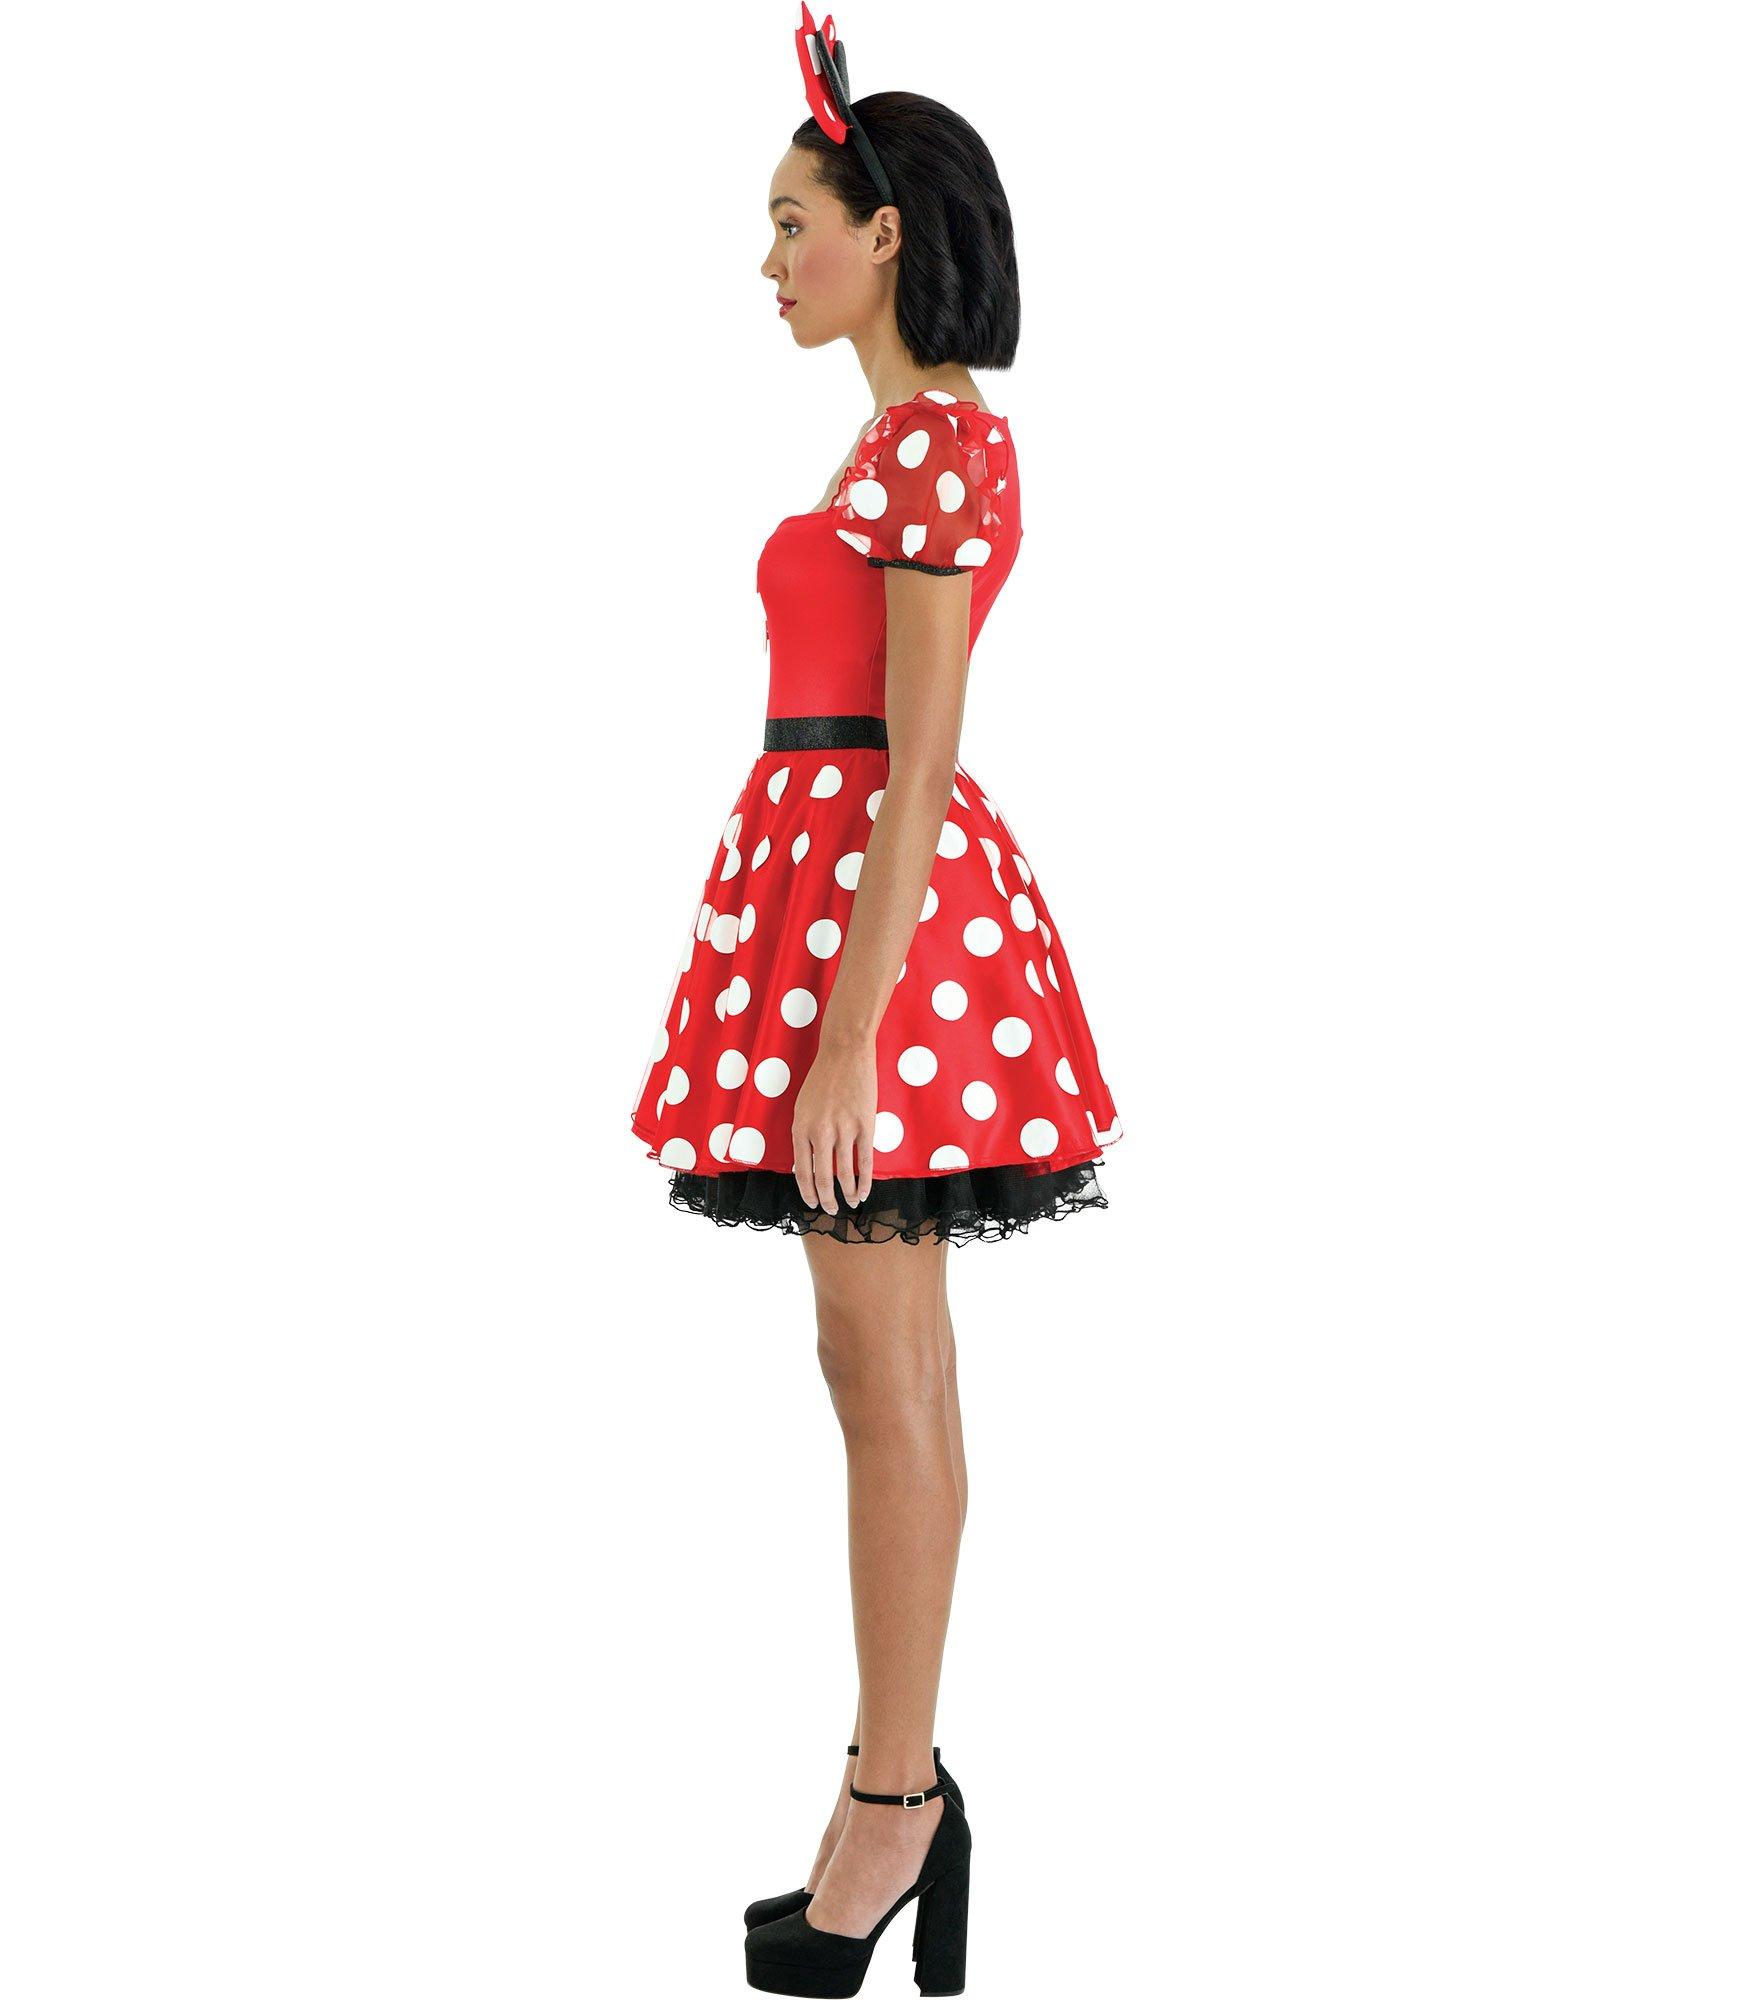 Adult Minnie Mouse Costume